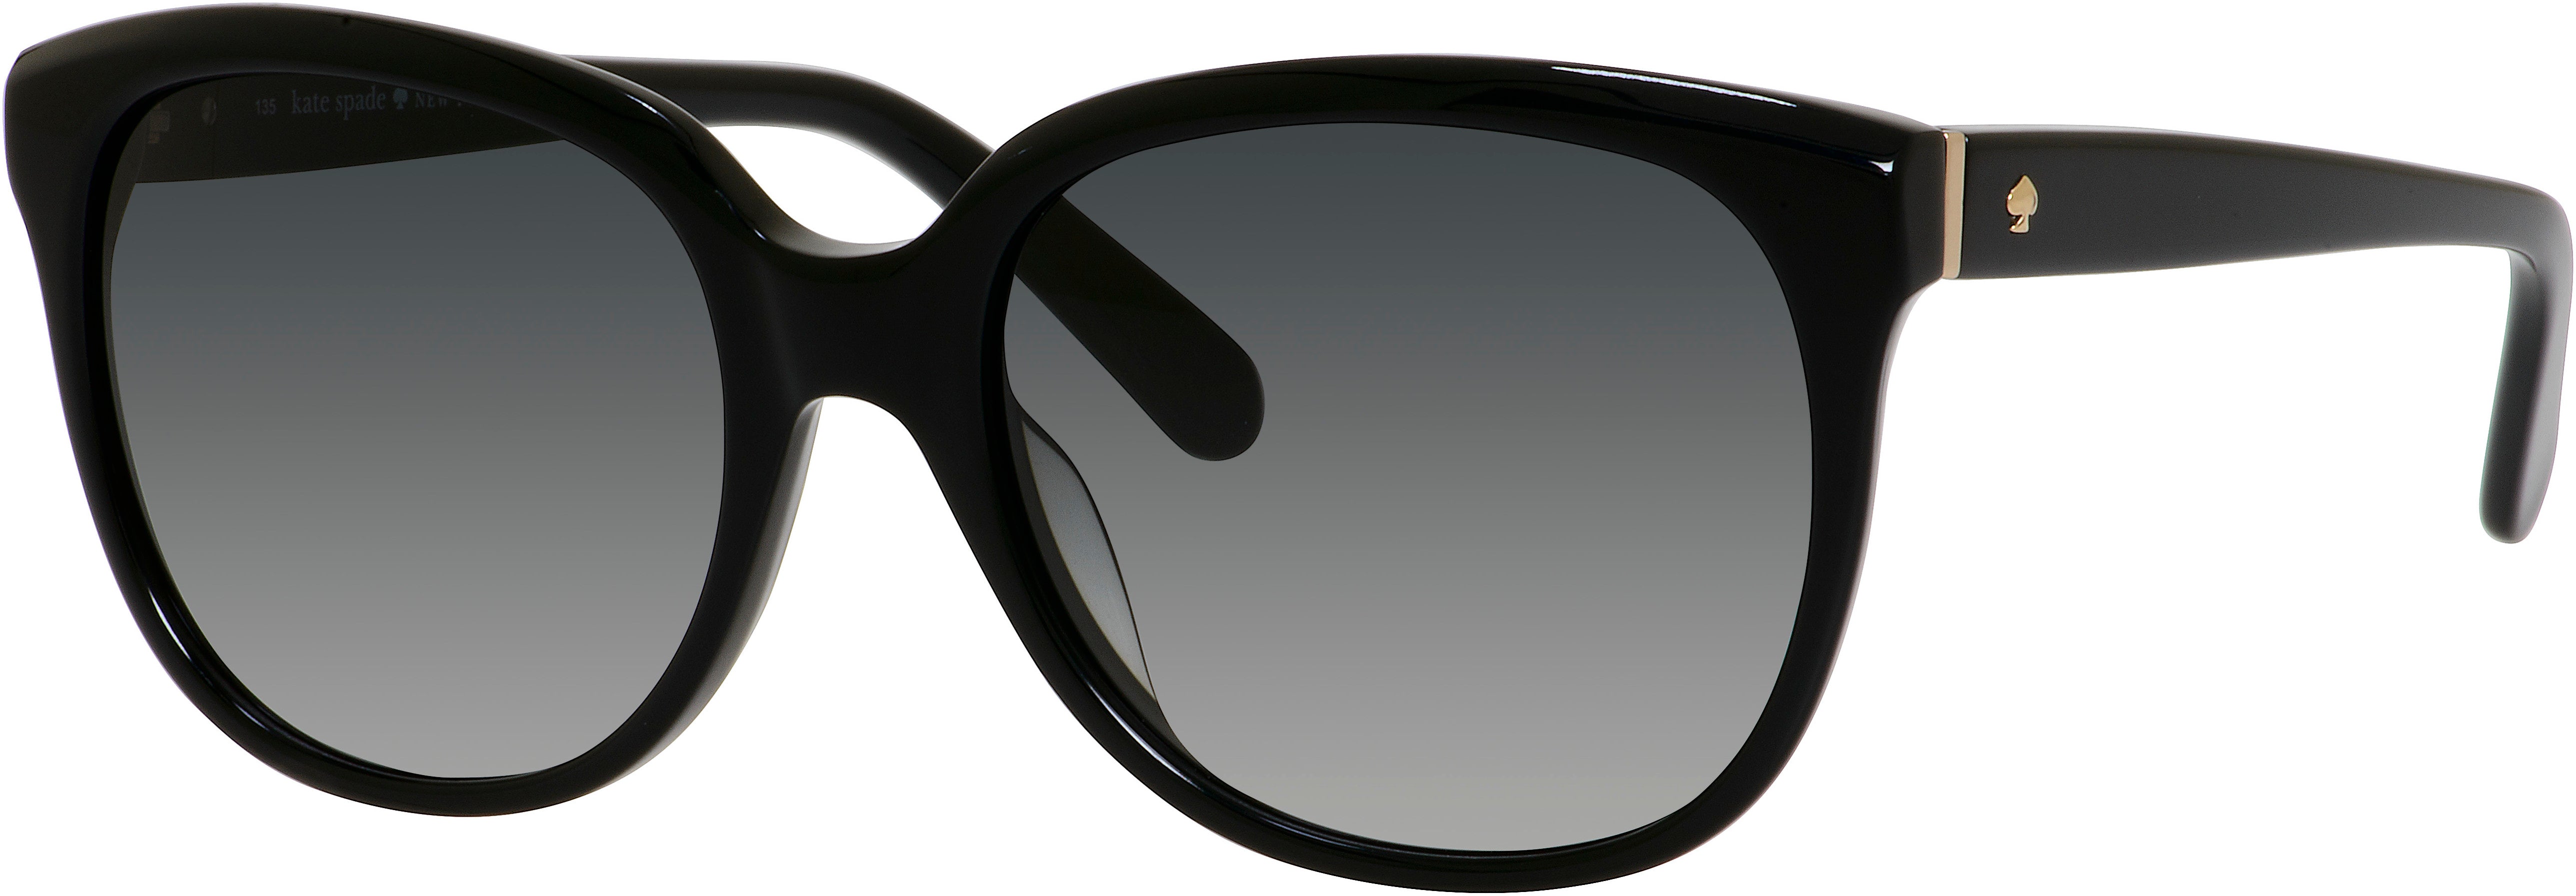 Kate Spade Bayleigh/S Pillow Sunglasses 0807-0807  Black (Y7 Gray Gradient)